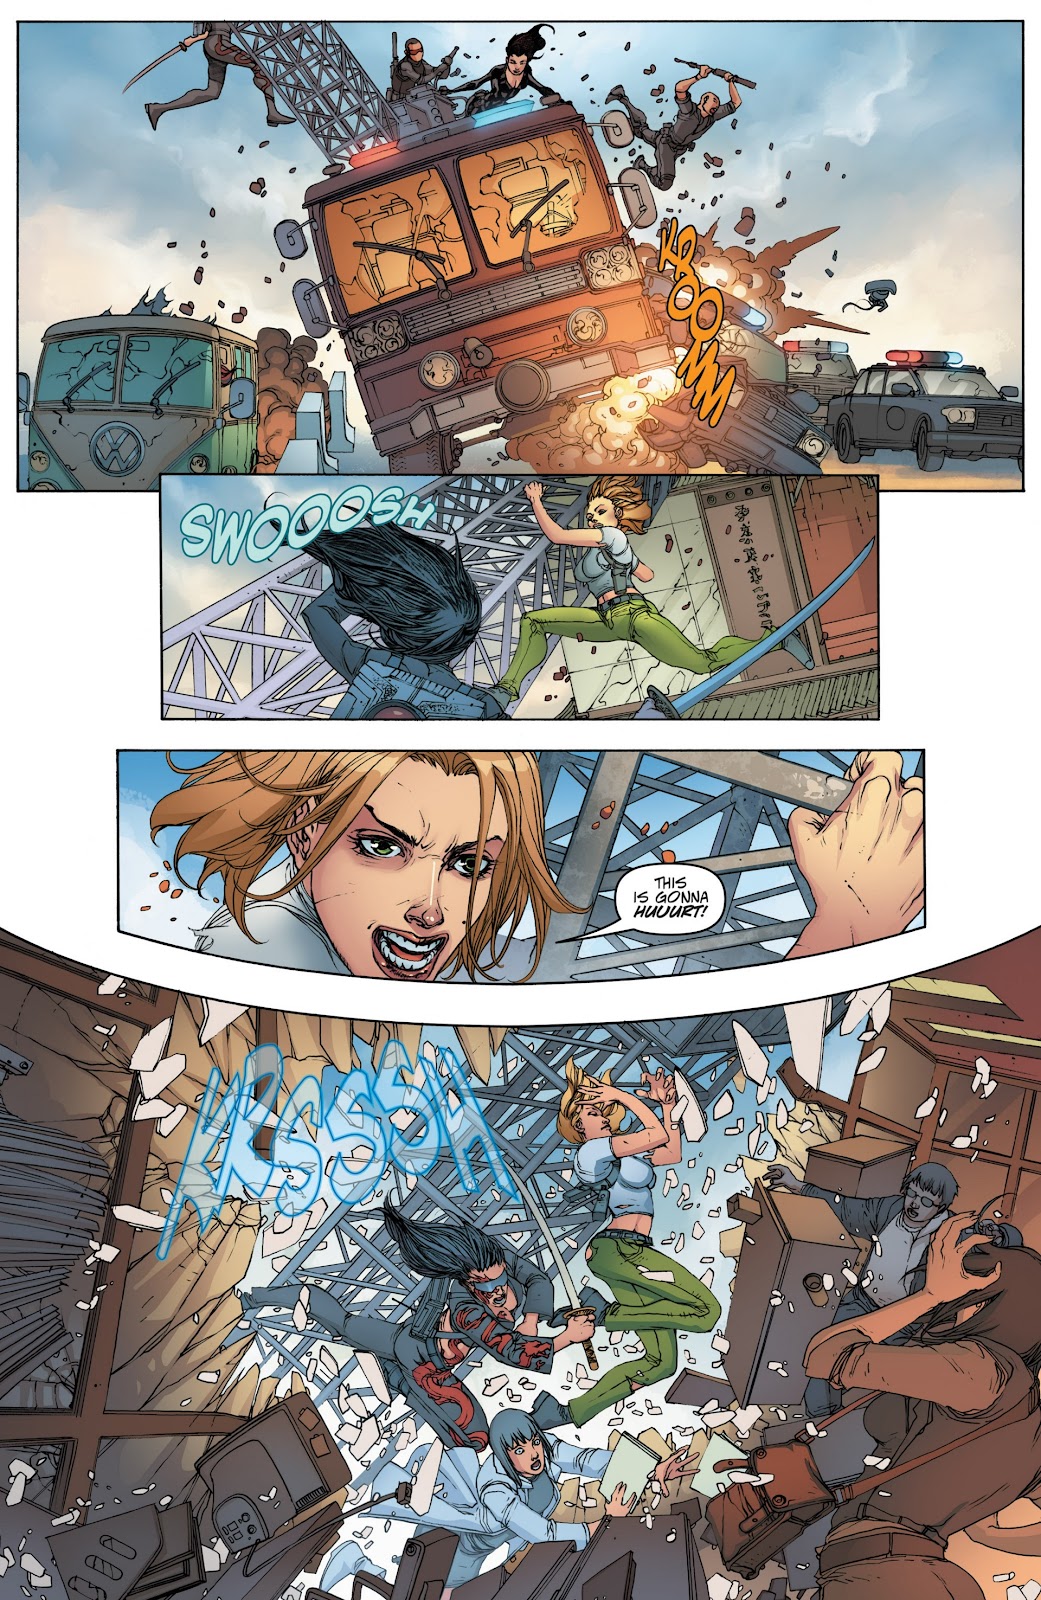 Danger Girl: The Chase issue 3 - Page 8